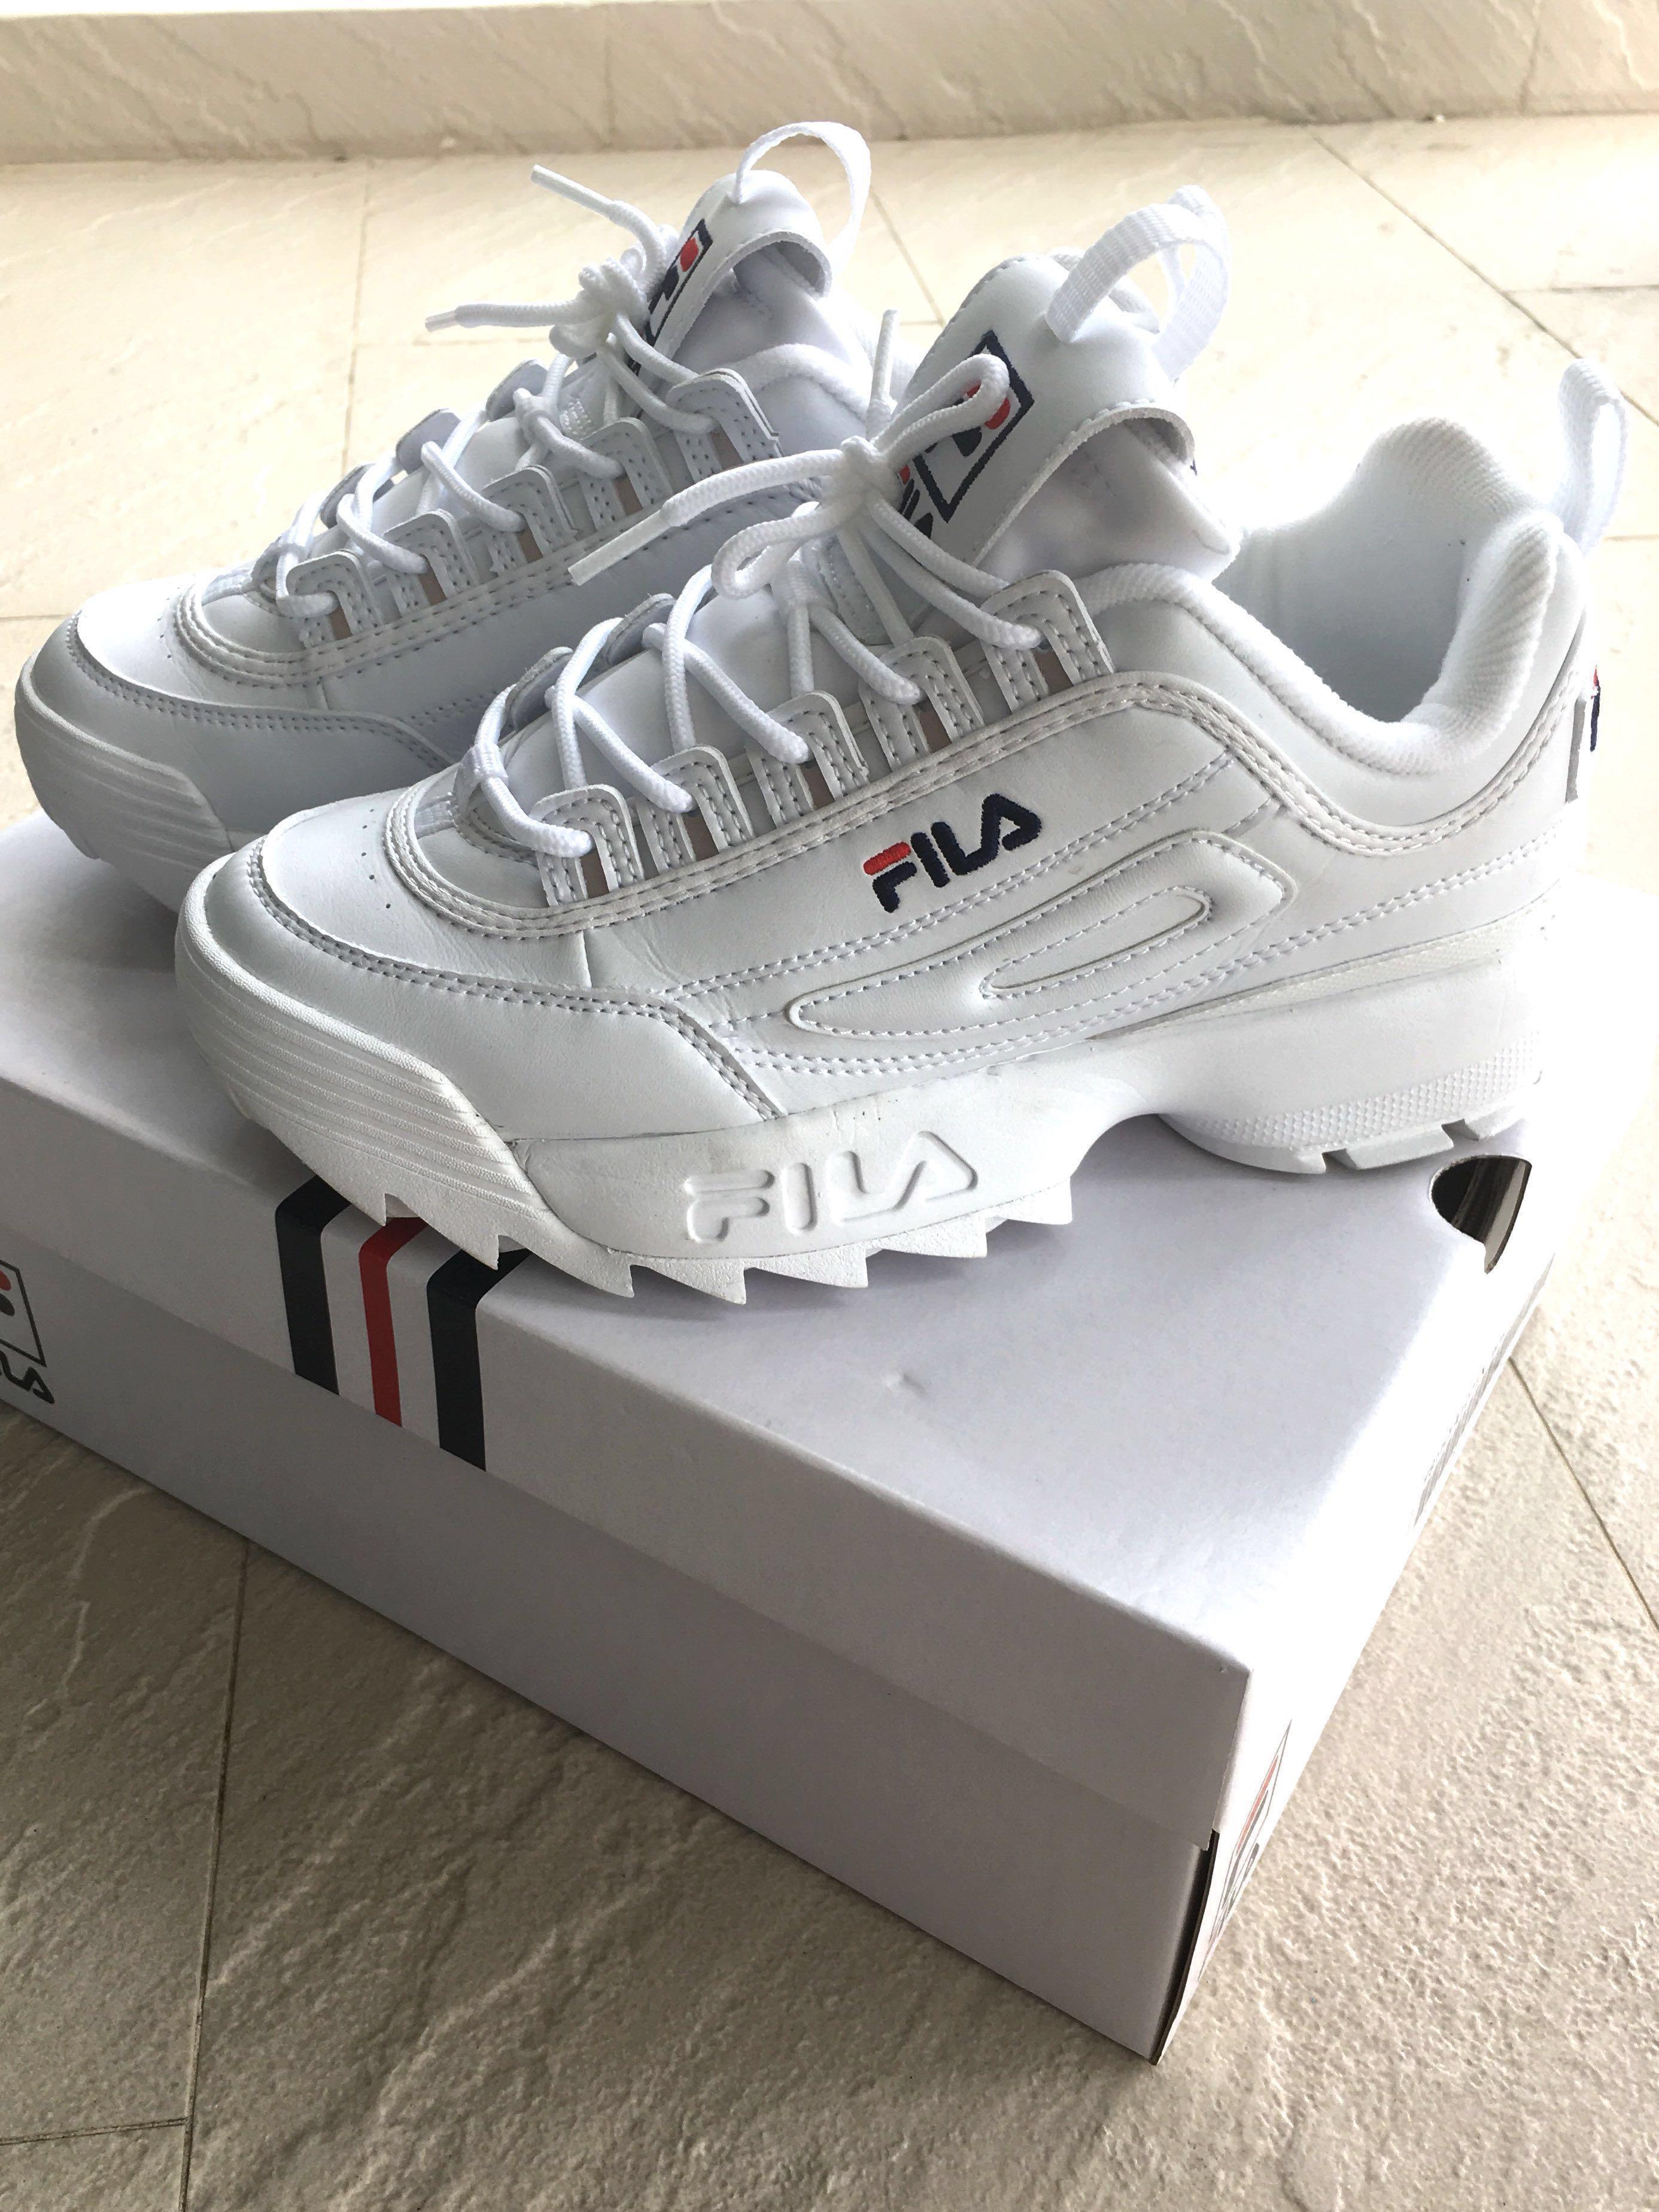 fila shoes in white